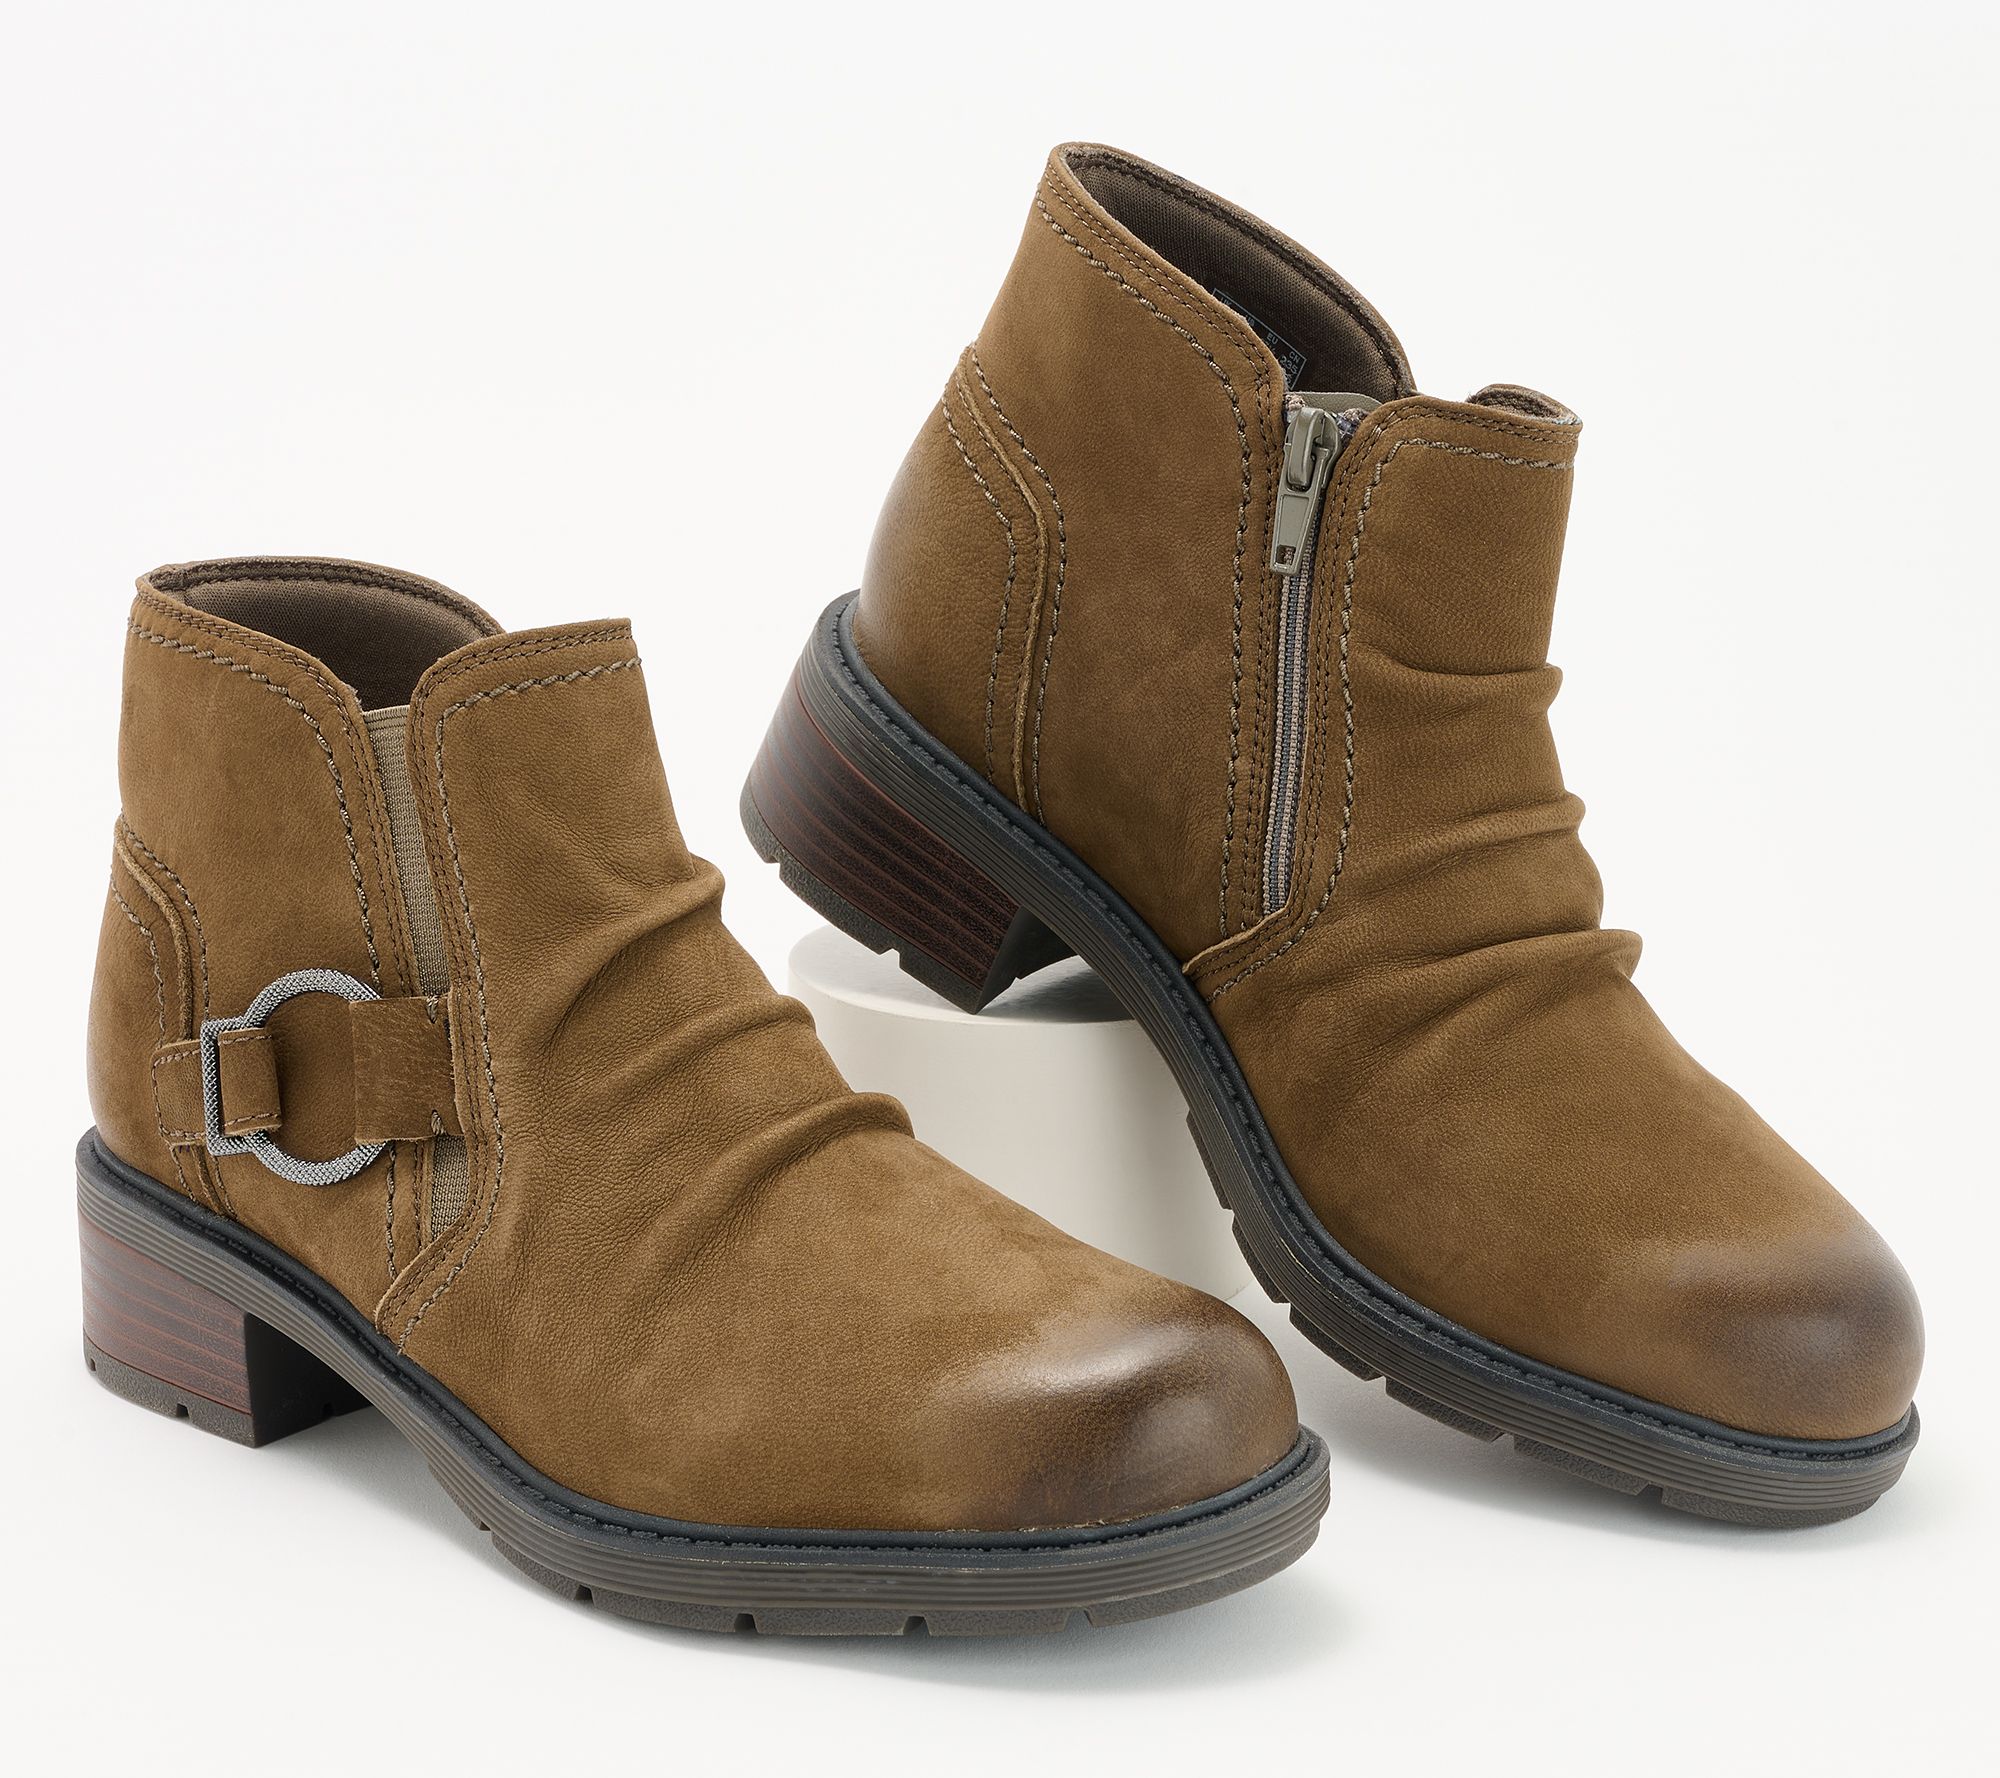 Clarks Leather Ankle Boot - Hearth - QVC.com